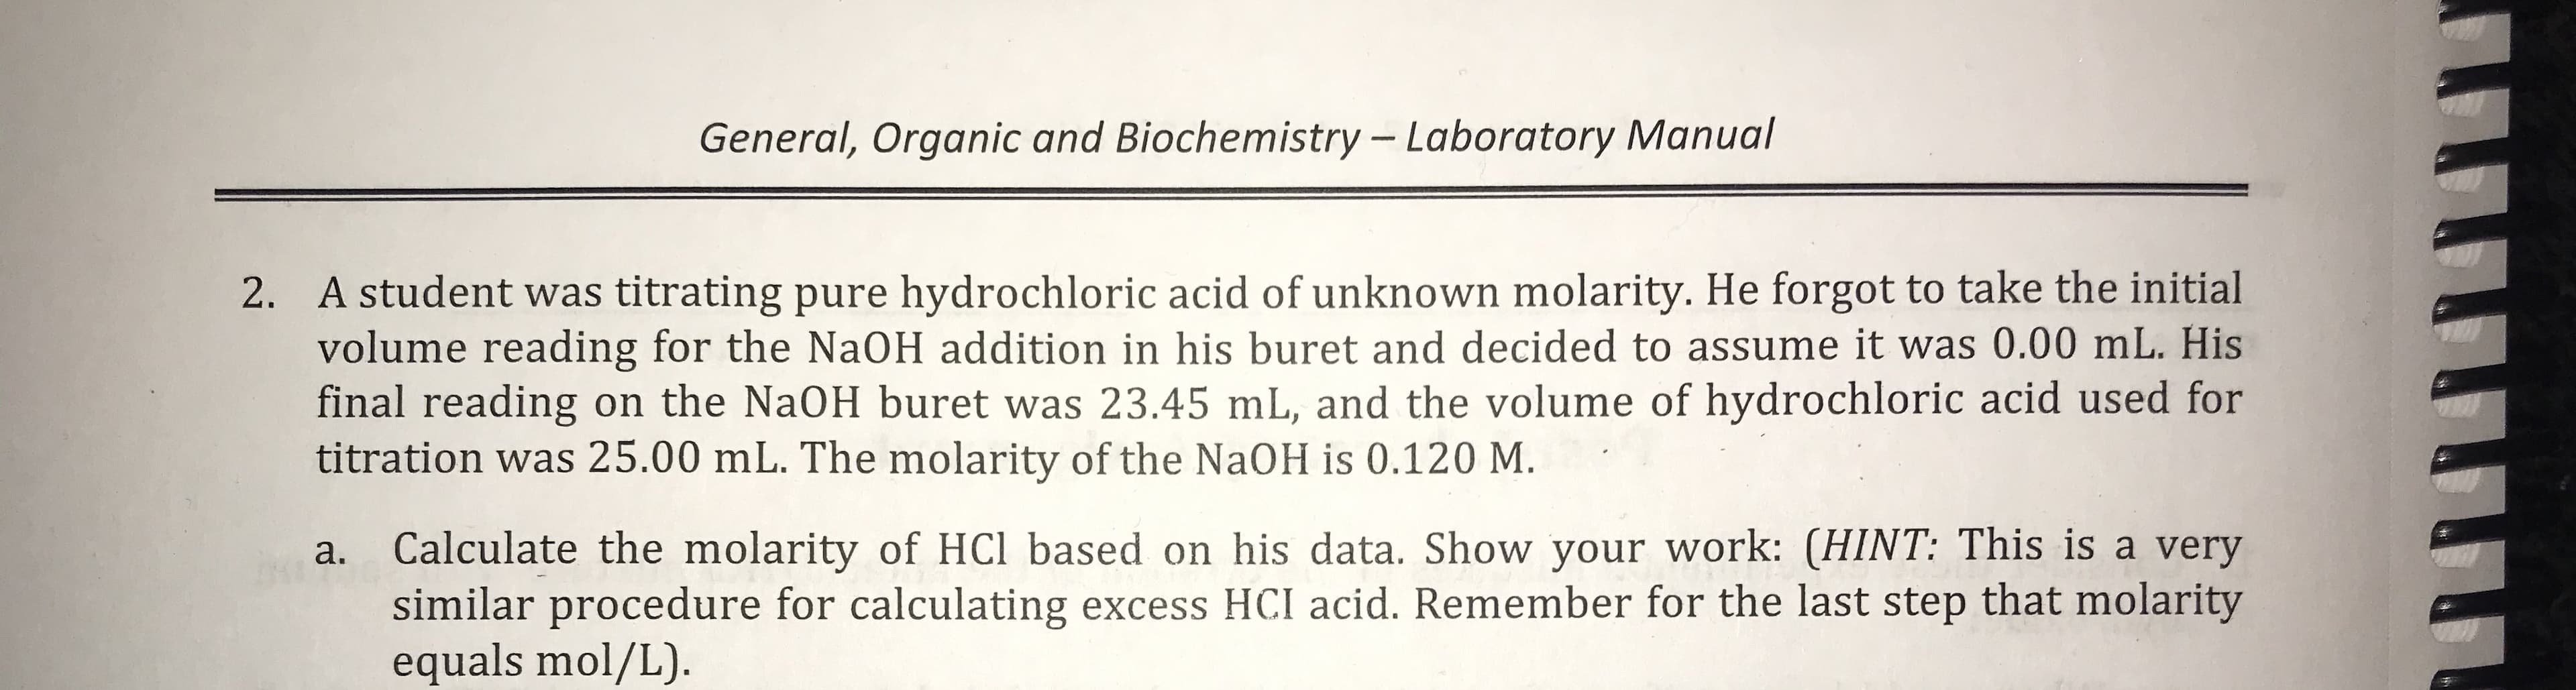 General, Organic and Biochemistry -Laboratory Manual
2. A student was titrating pure hydrochloric acid of unknown molarity. He forgot to take the initial
volume reading for the NaOH addition in his buret and decided to assume it was 0.00 mL. His
final reading on the NaOH buret was 23.45 mL, and the volume of hydrochloric acid used for
titration was 25.00 mL. The molarity of the NaOH is 0.120 M.
his data. Show your work: (HINT: This is a very
Calculate the molarity of HCl based
similar procedure for calculating excess HCI acid. Remember for the last step that molarity
equals mol/L)
а.
